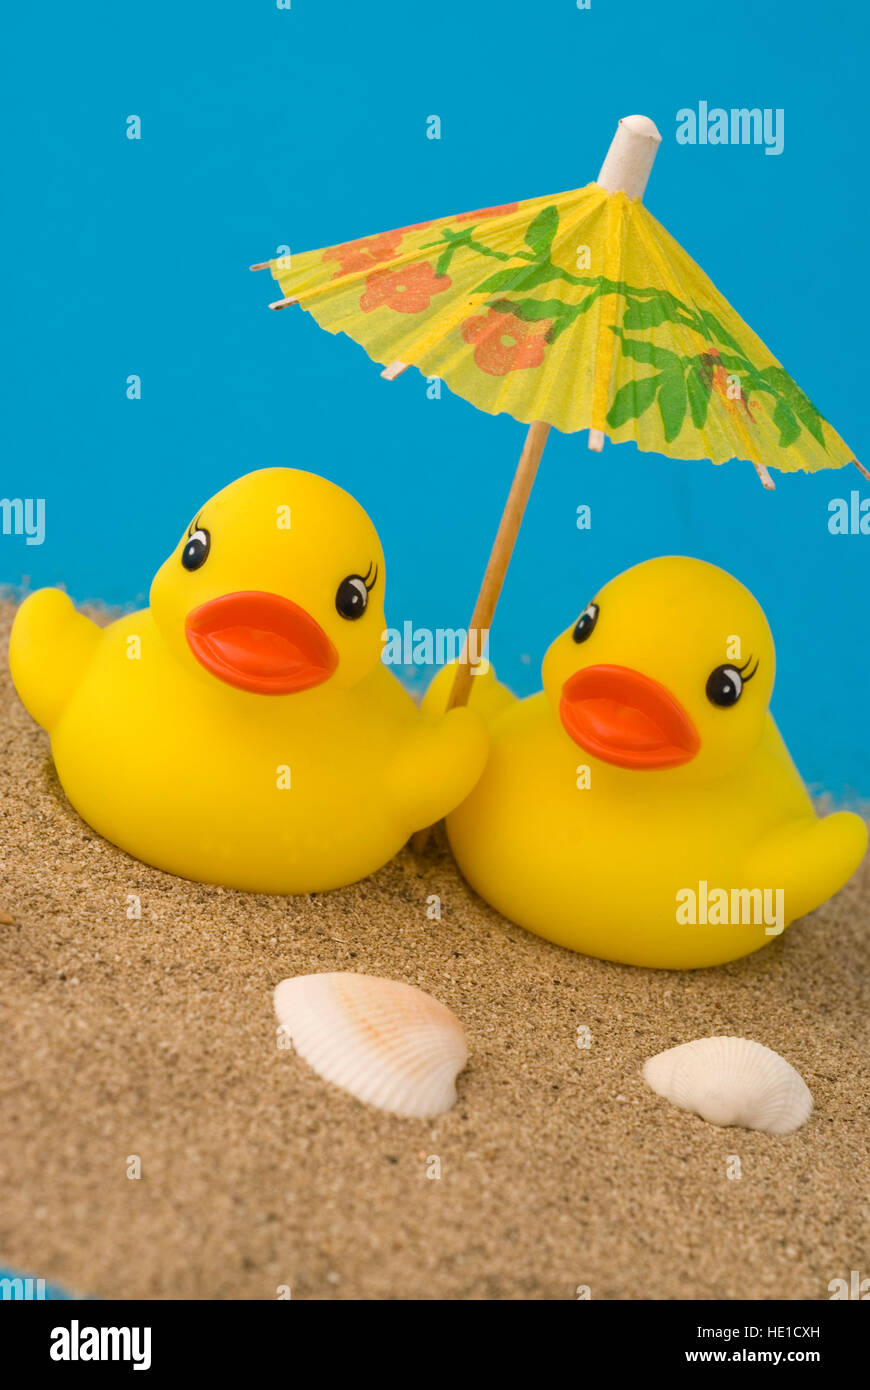 Symbolic picture, rubber duckies, beach holiday Stock Photo